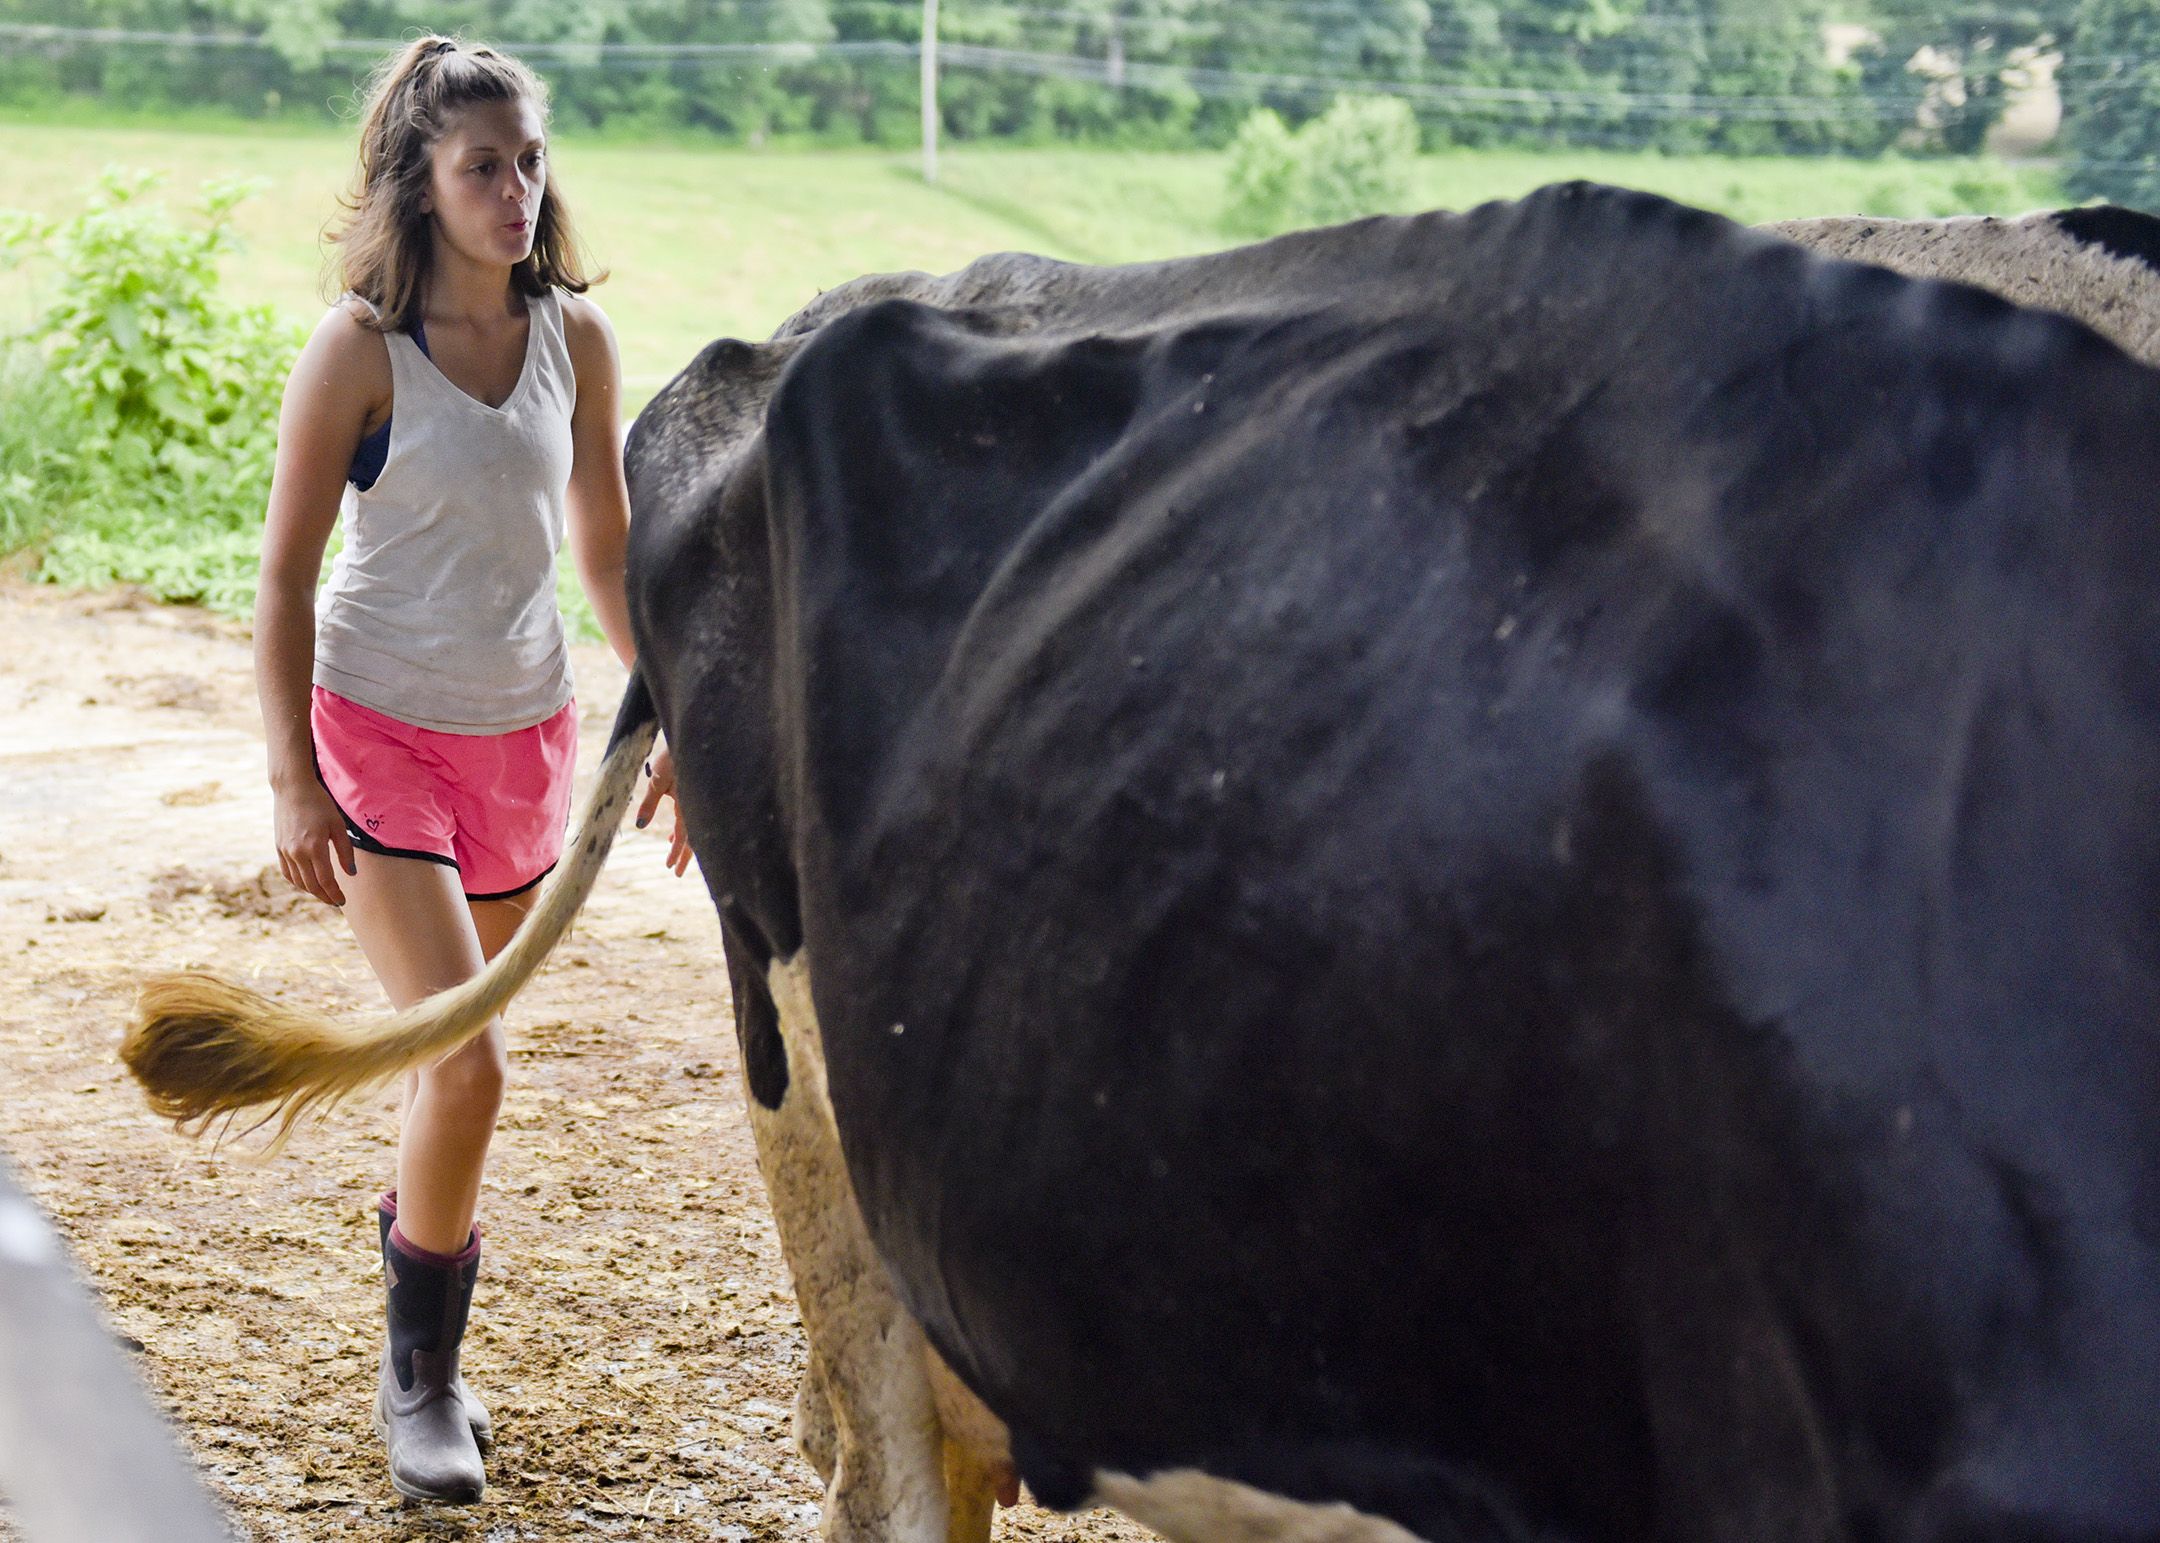  Morgan Krick follows the last dairy cows into the barn so she can count them. 